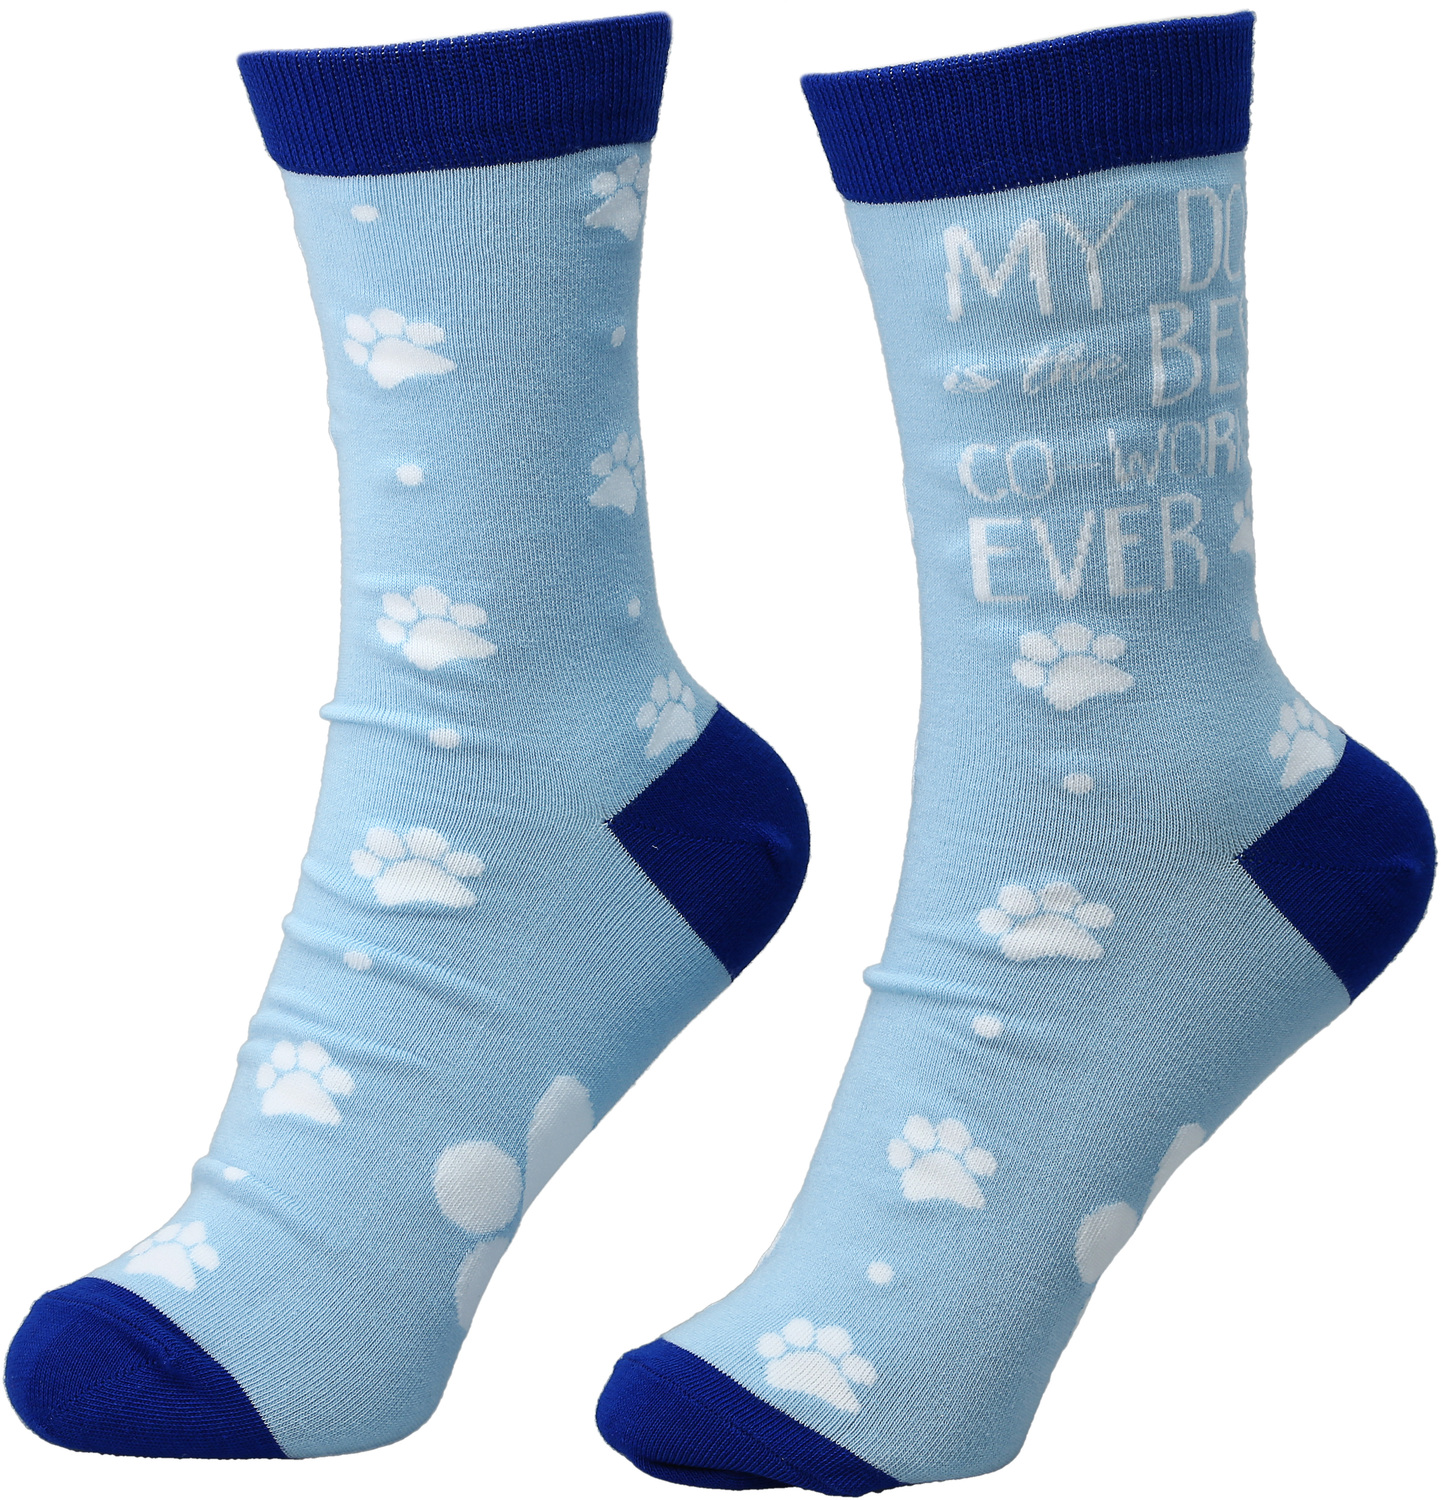 Dog by Essentially Yours - Dog - S/M Unisex Cotton Blend Sock